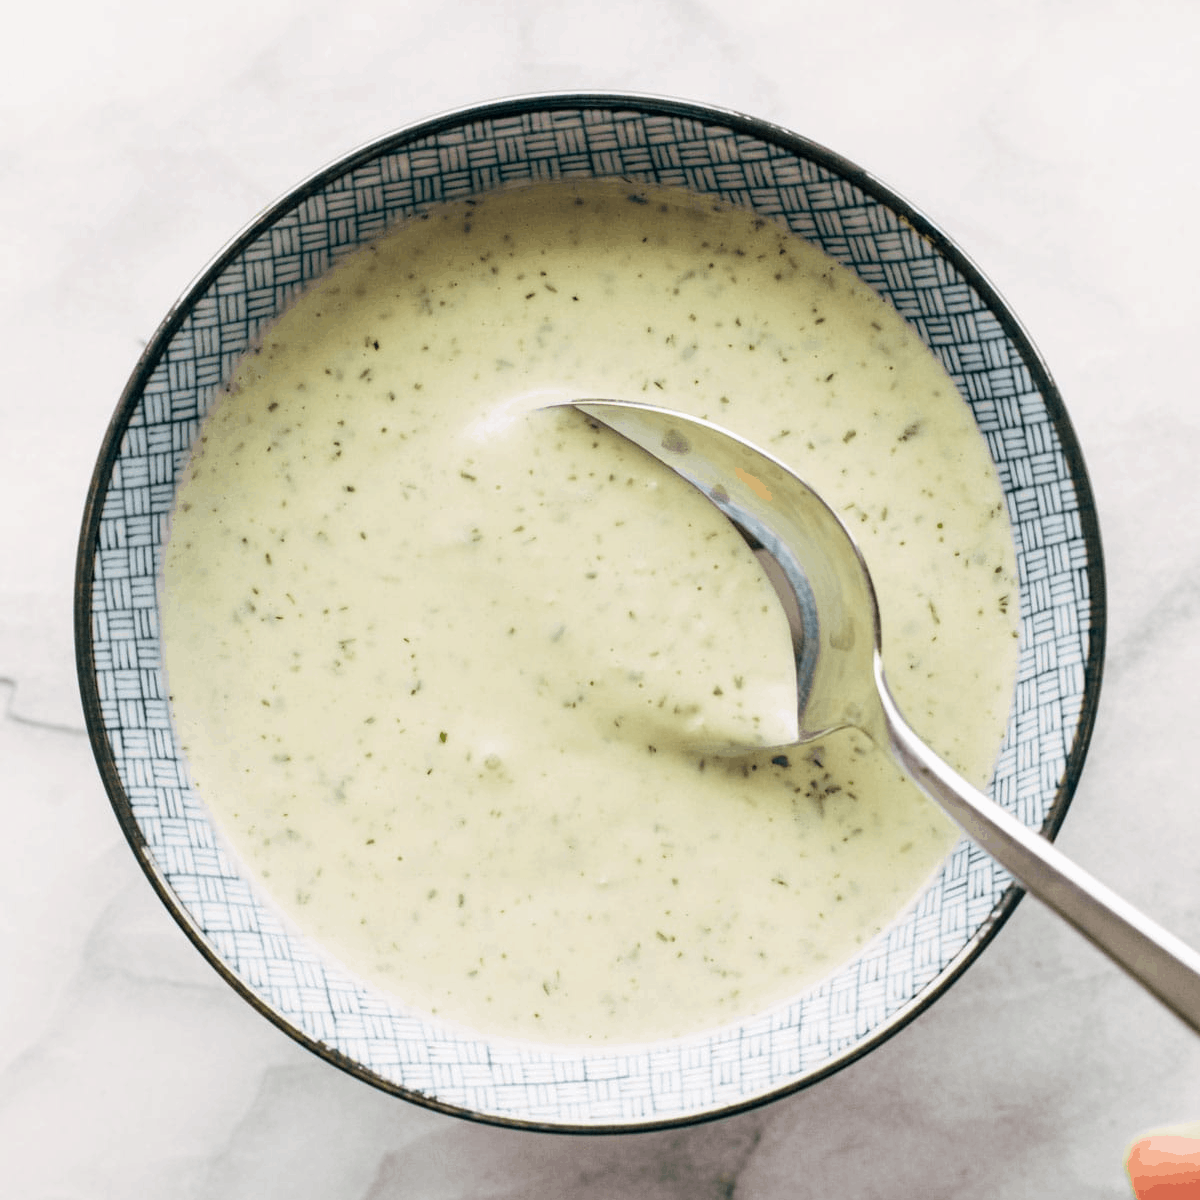 A spoon dipping into jalapeno ranch.